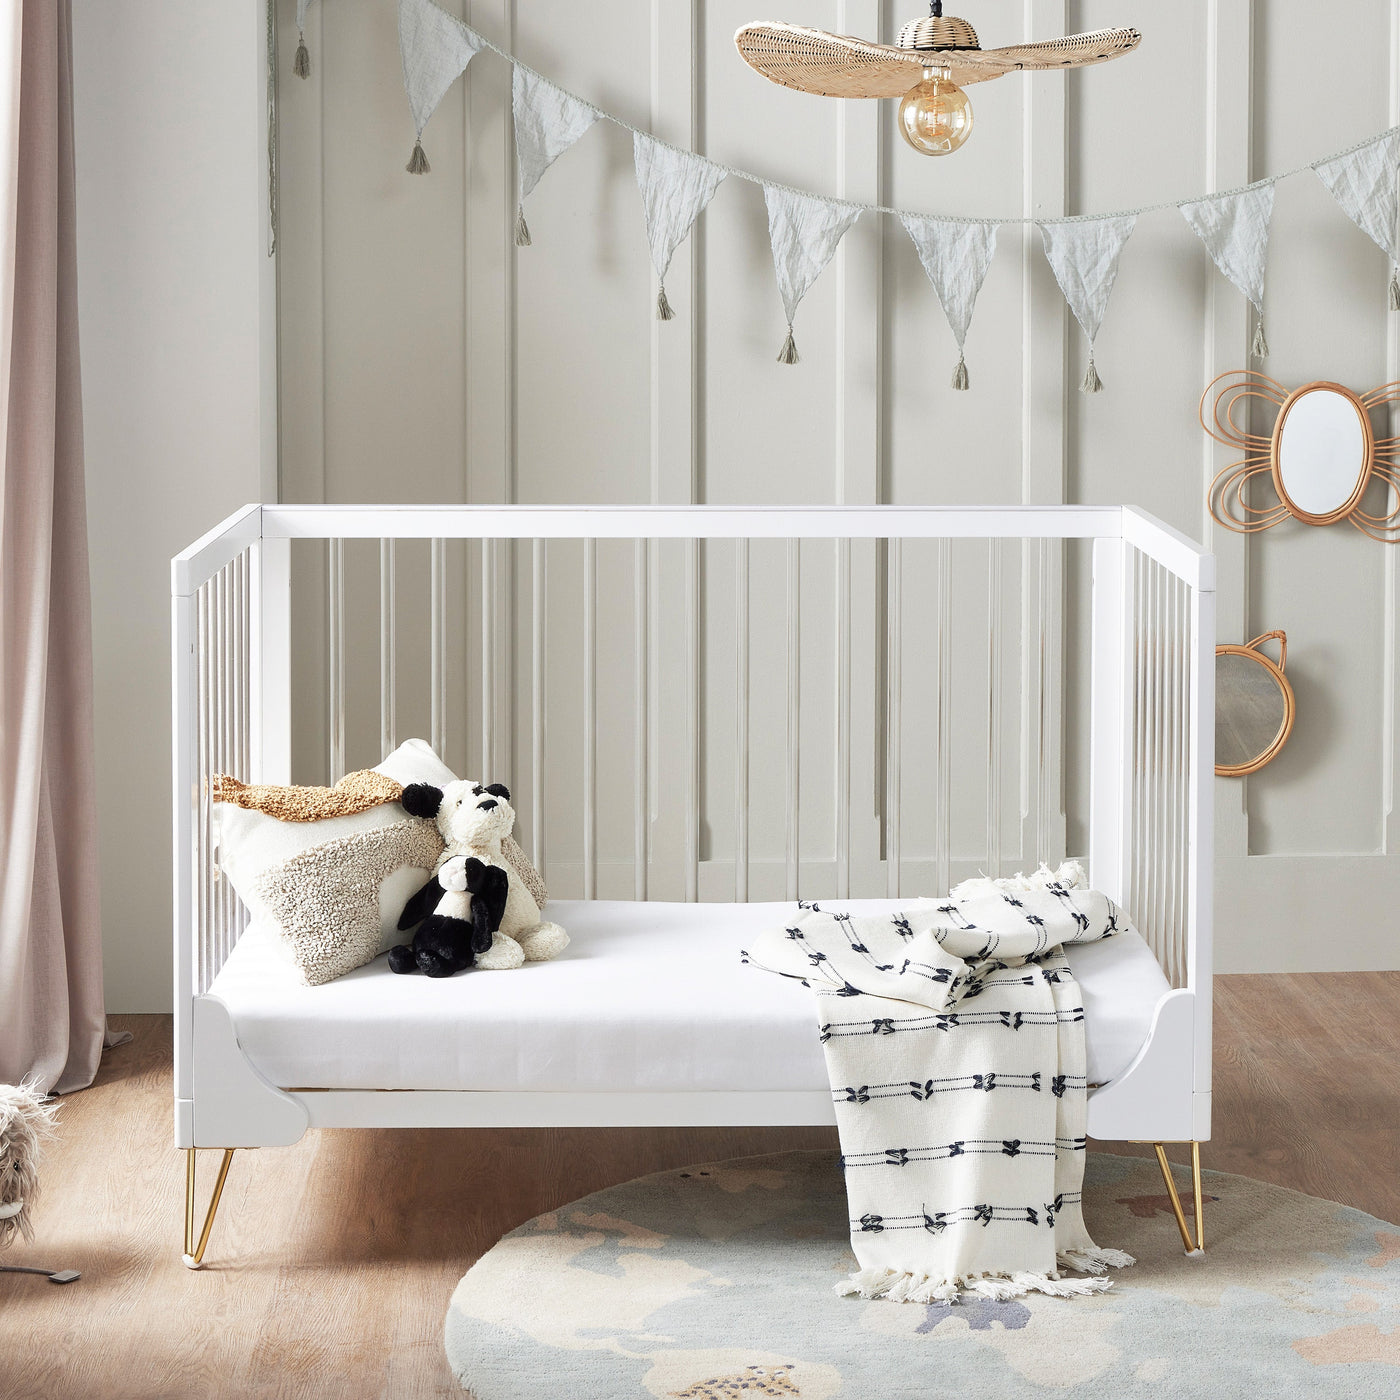 Kim Cot Bed-Cots & Cot Beds-Babymore-Yes Bebe